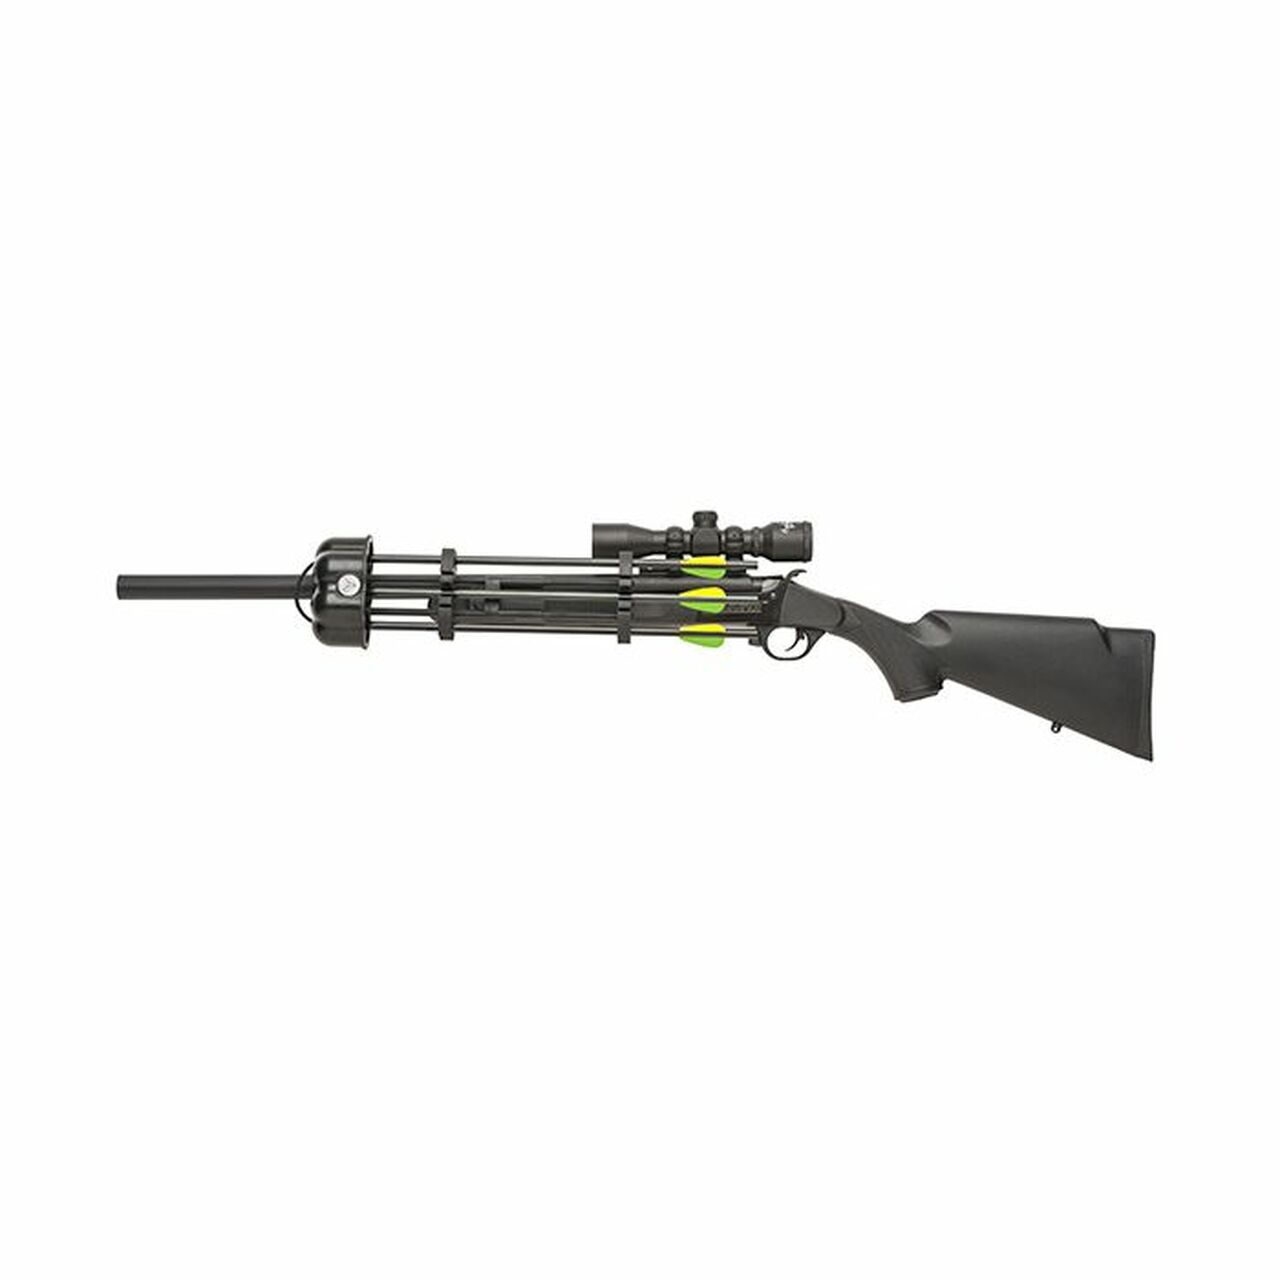 Image of Traditions Crackshot XBR Arrow Launching Rifle, .22LR 16.5" Edge Scope Package